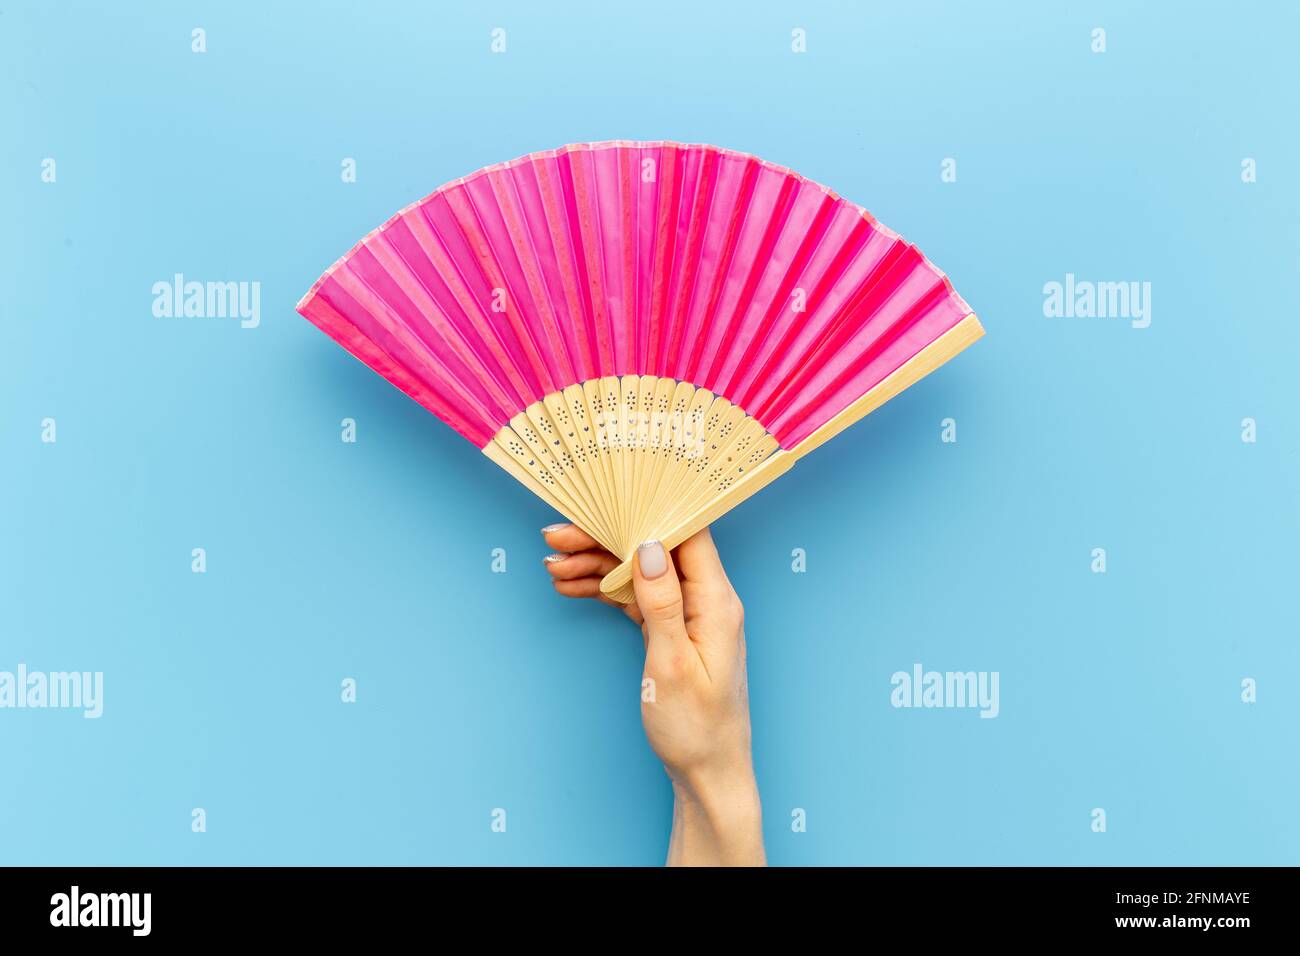 How to make a paper Hand Fan with Colourful paper